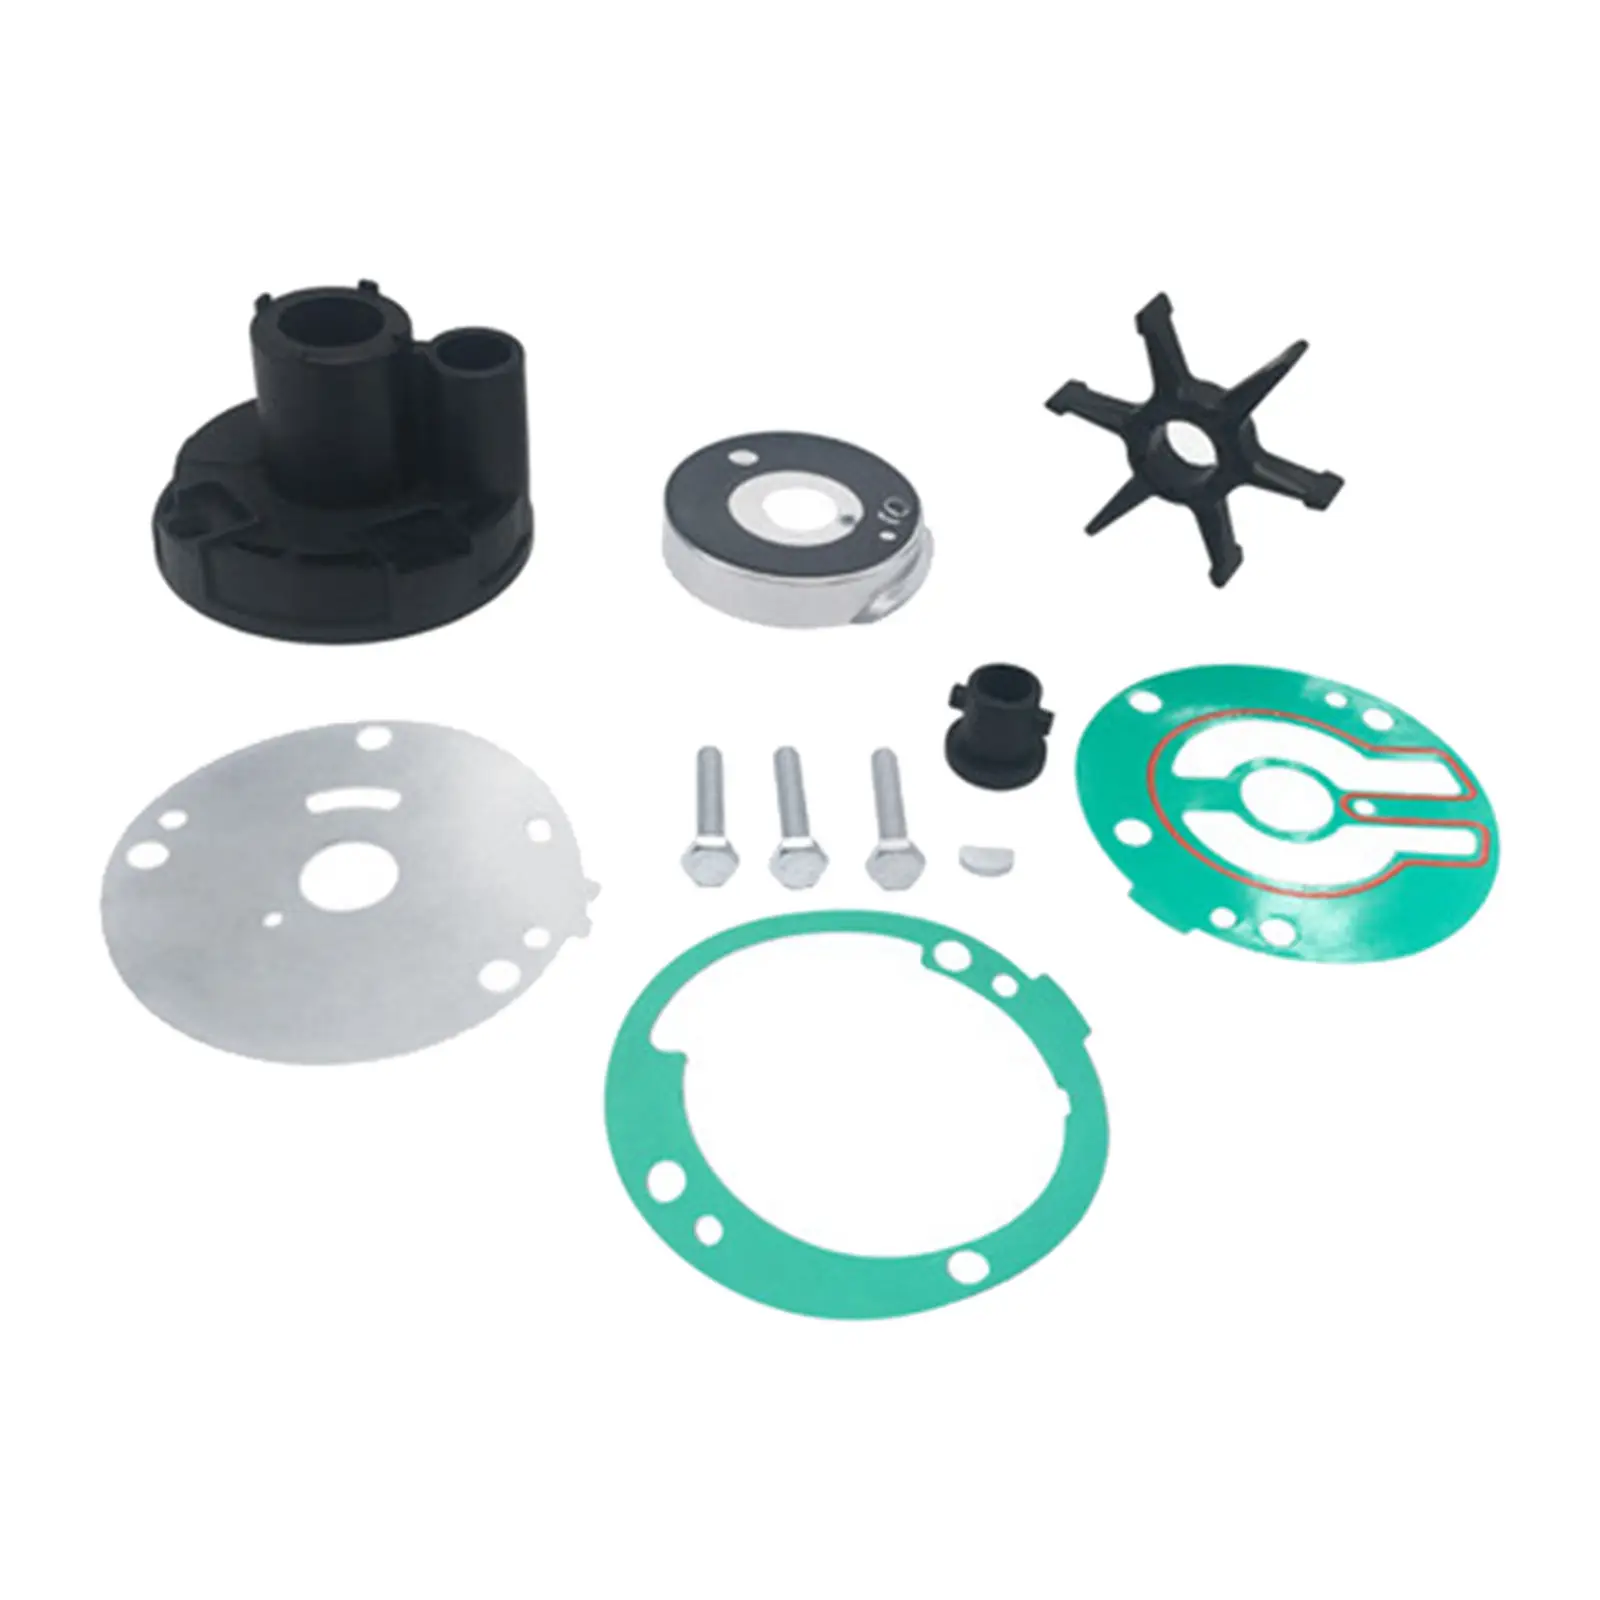 Water Pump Impeller Kit for Yamaha 25HP 30HP 18-3427 689-W0078-06 Replace